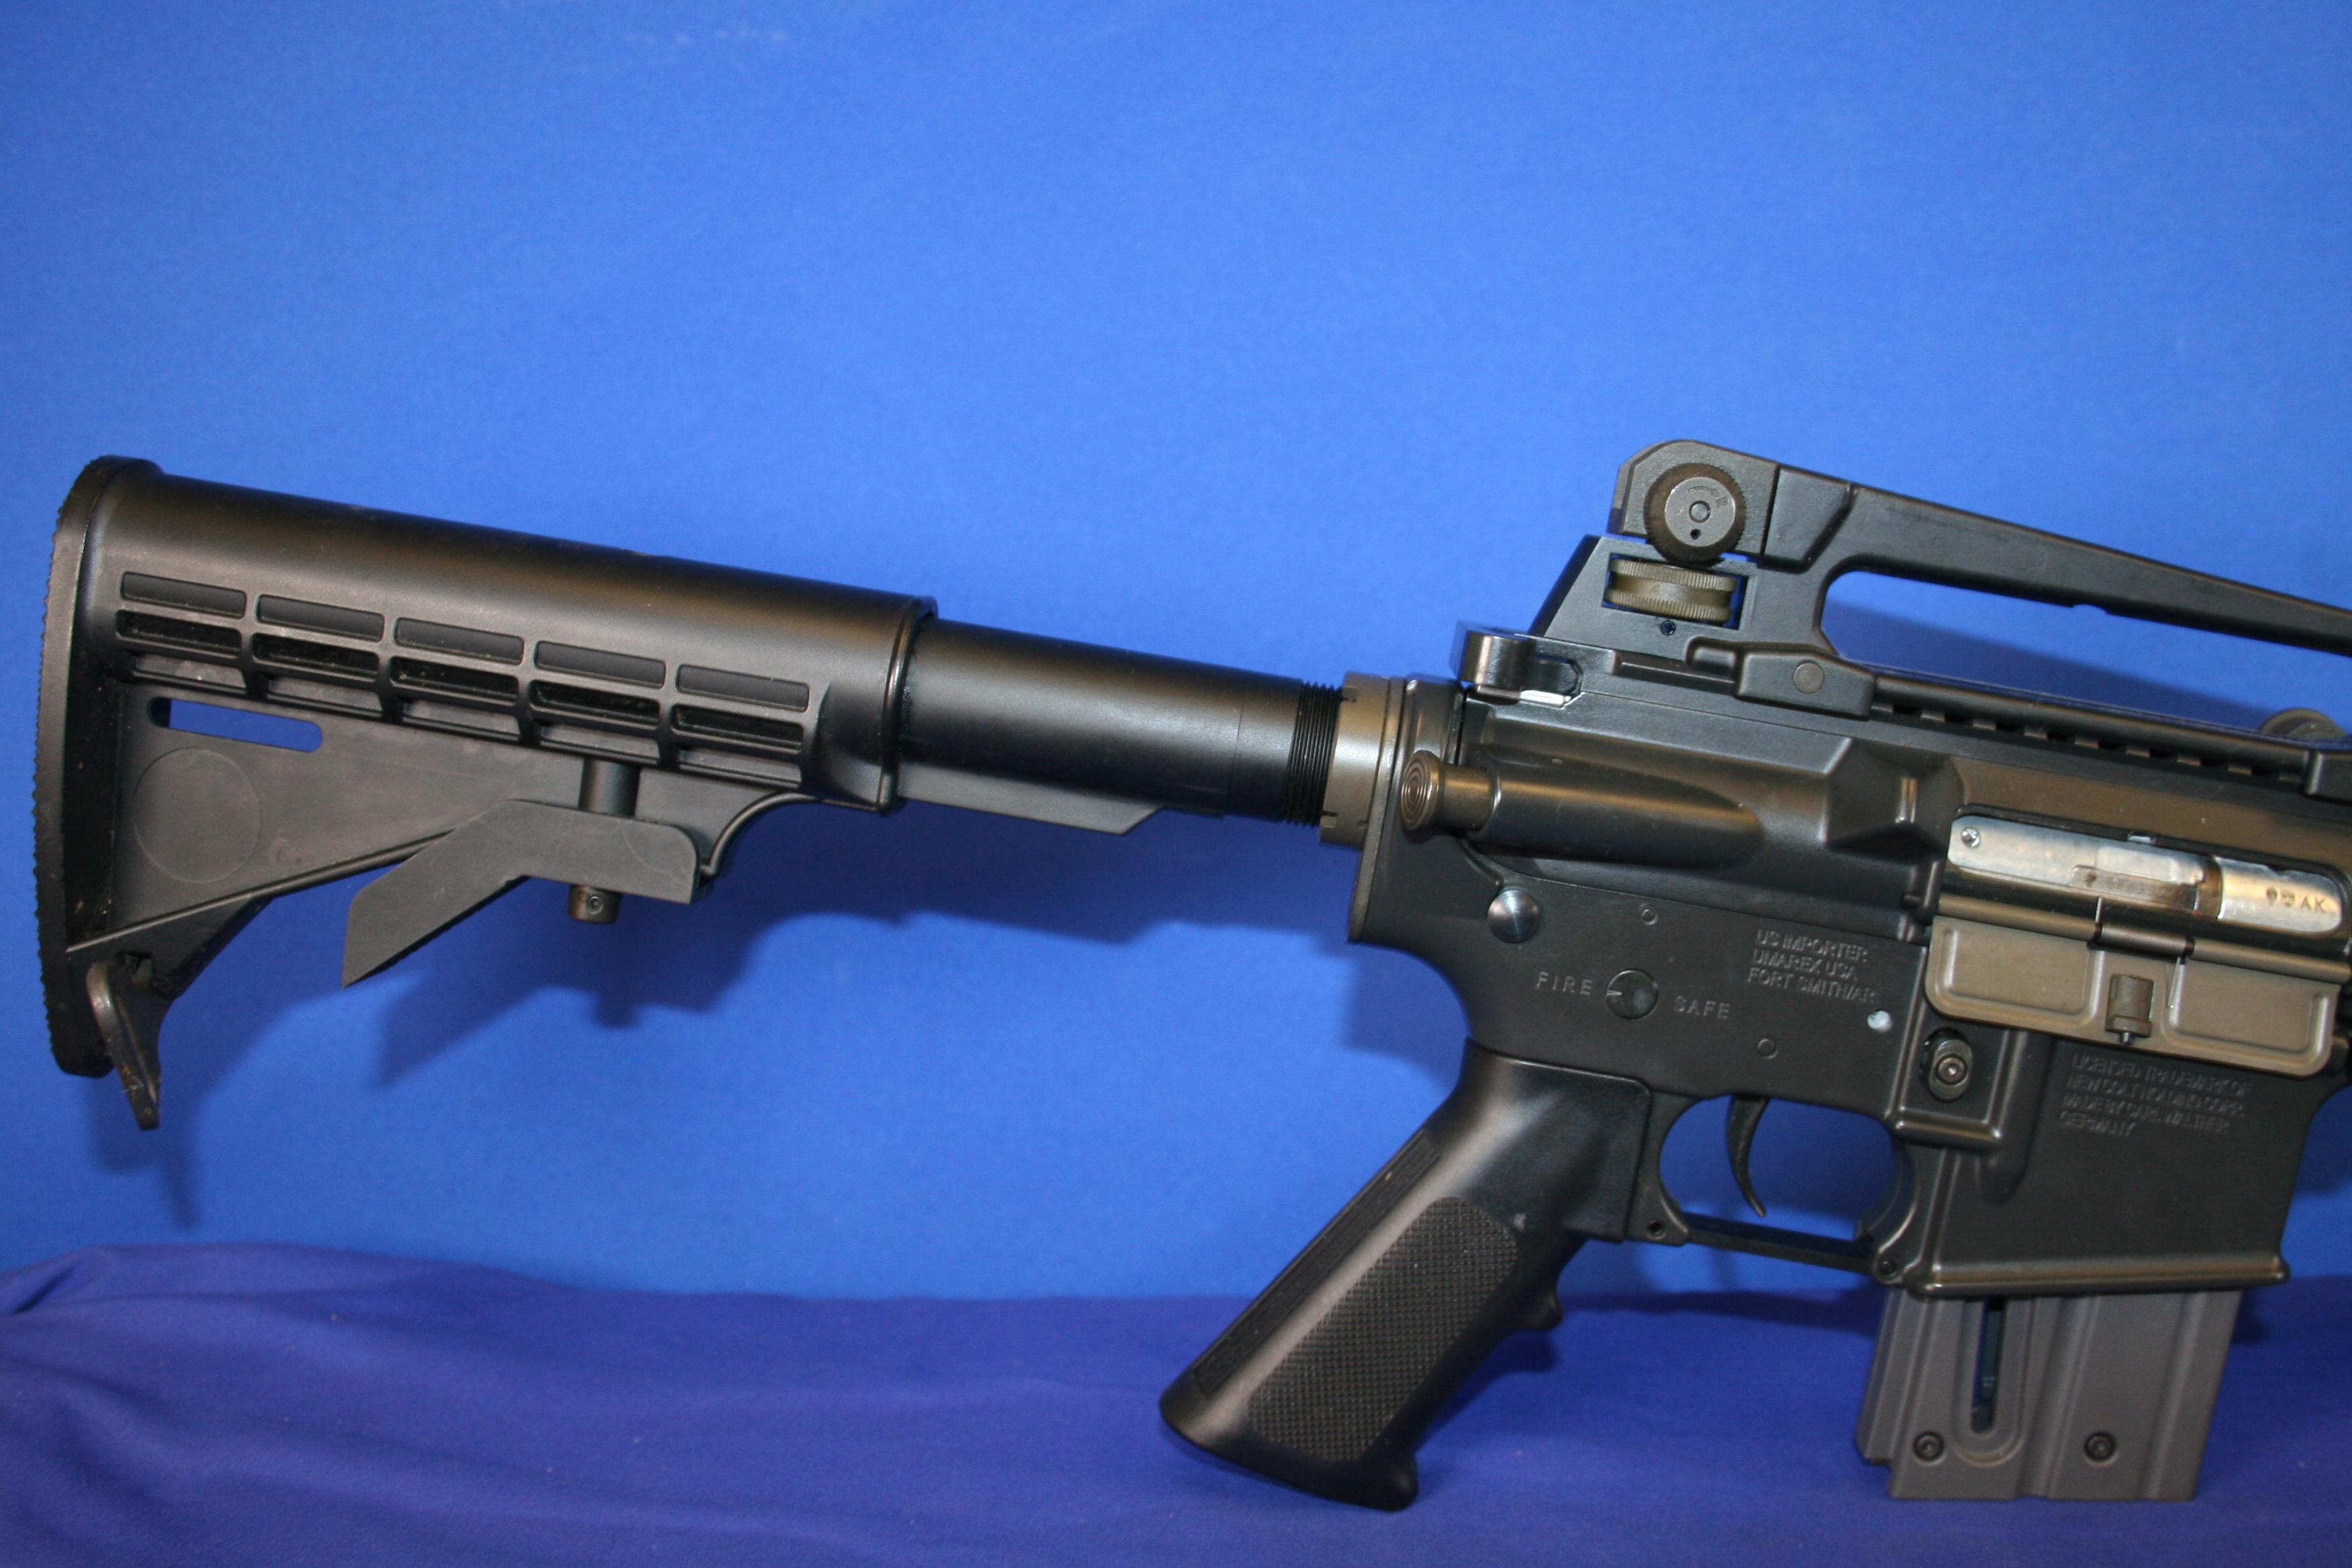 Colt M4 22LR Rifle, 16" Barrel, Two 10-Round Magazines. SN# BP039749.  OK For Sale In California.